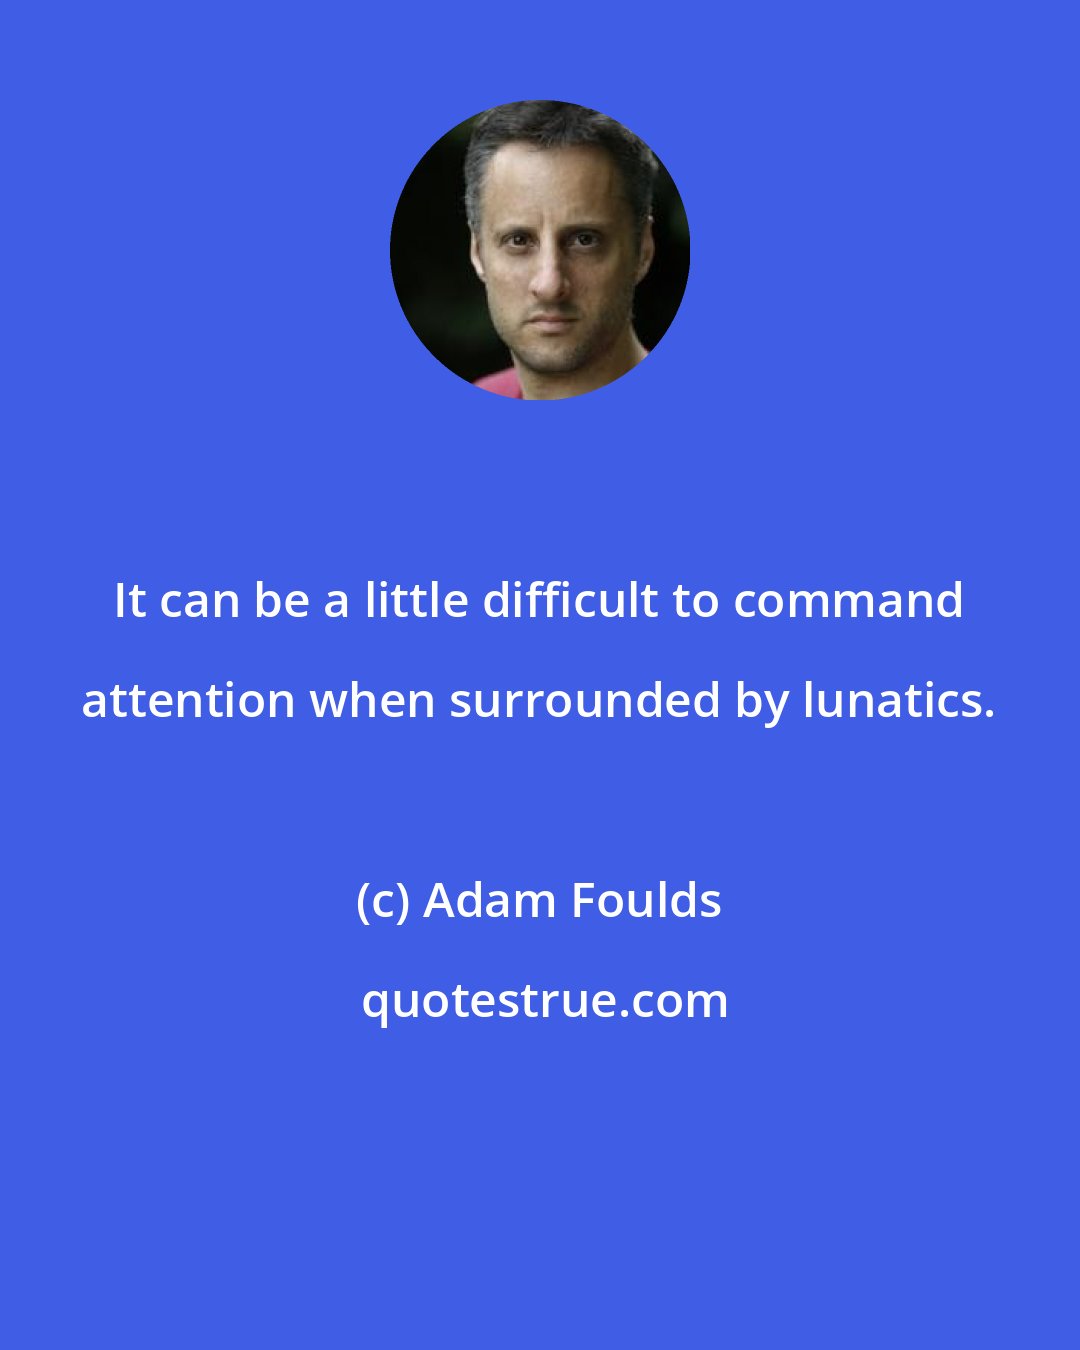 Adam Foulds: It can be a little difficult to command attention when surrounded by lunatics.